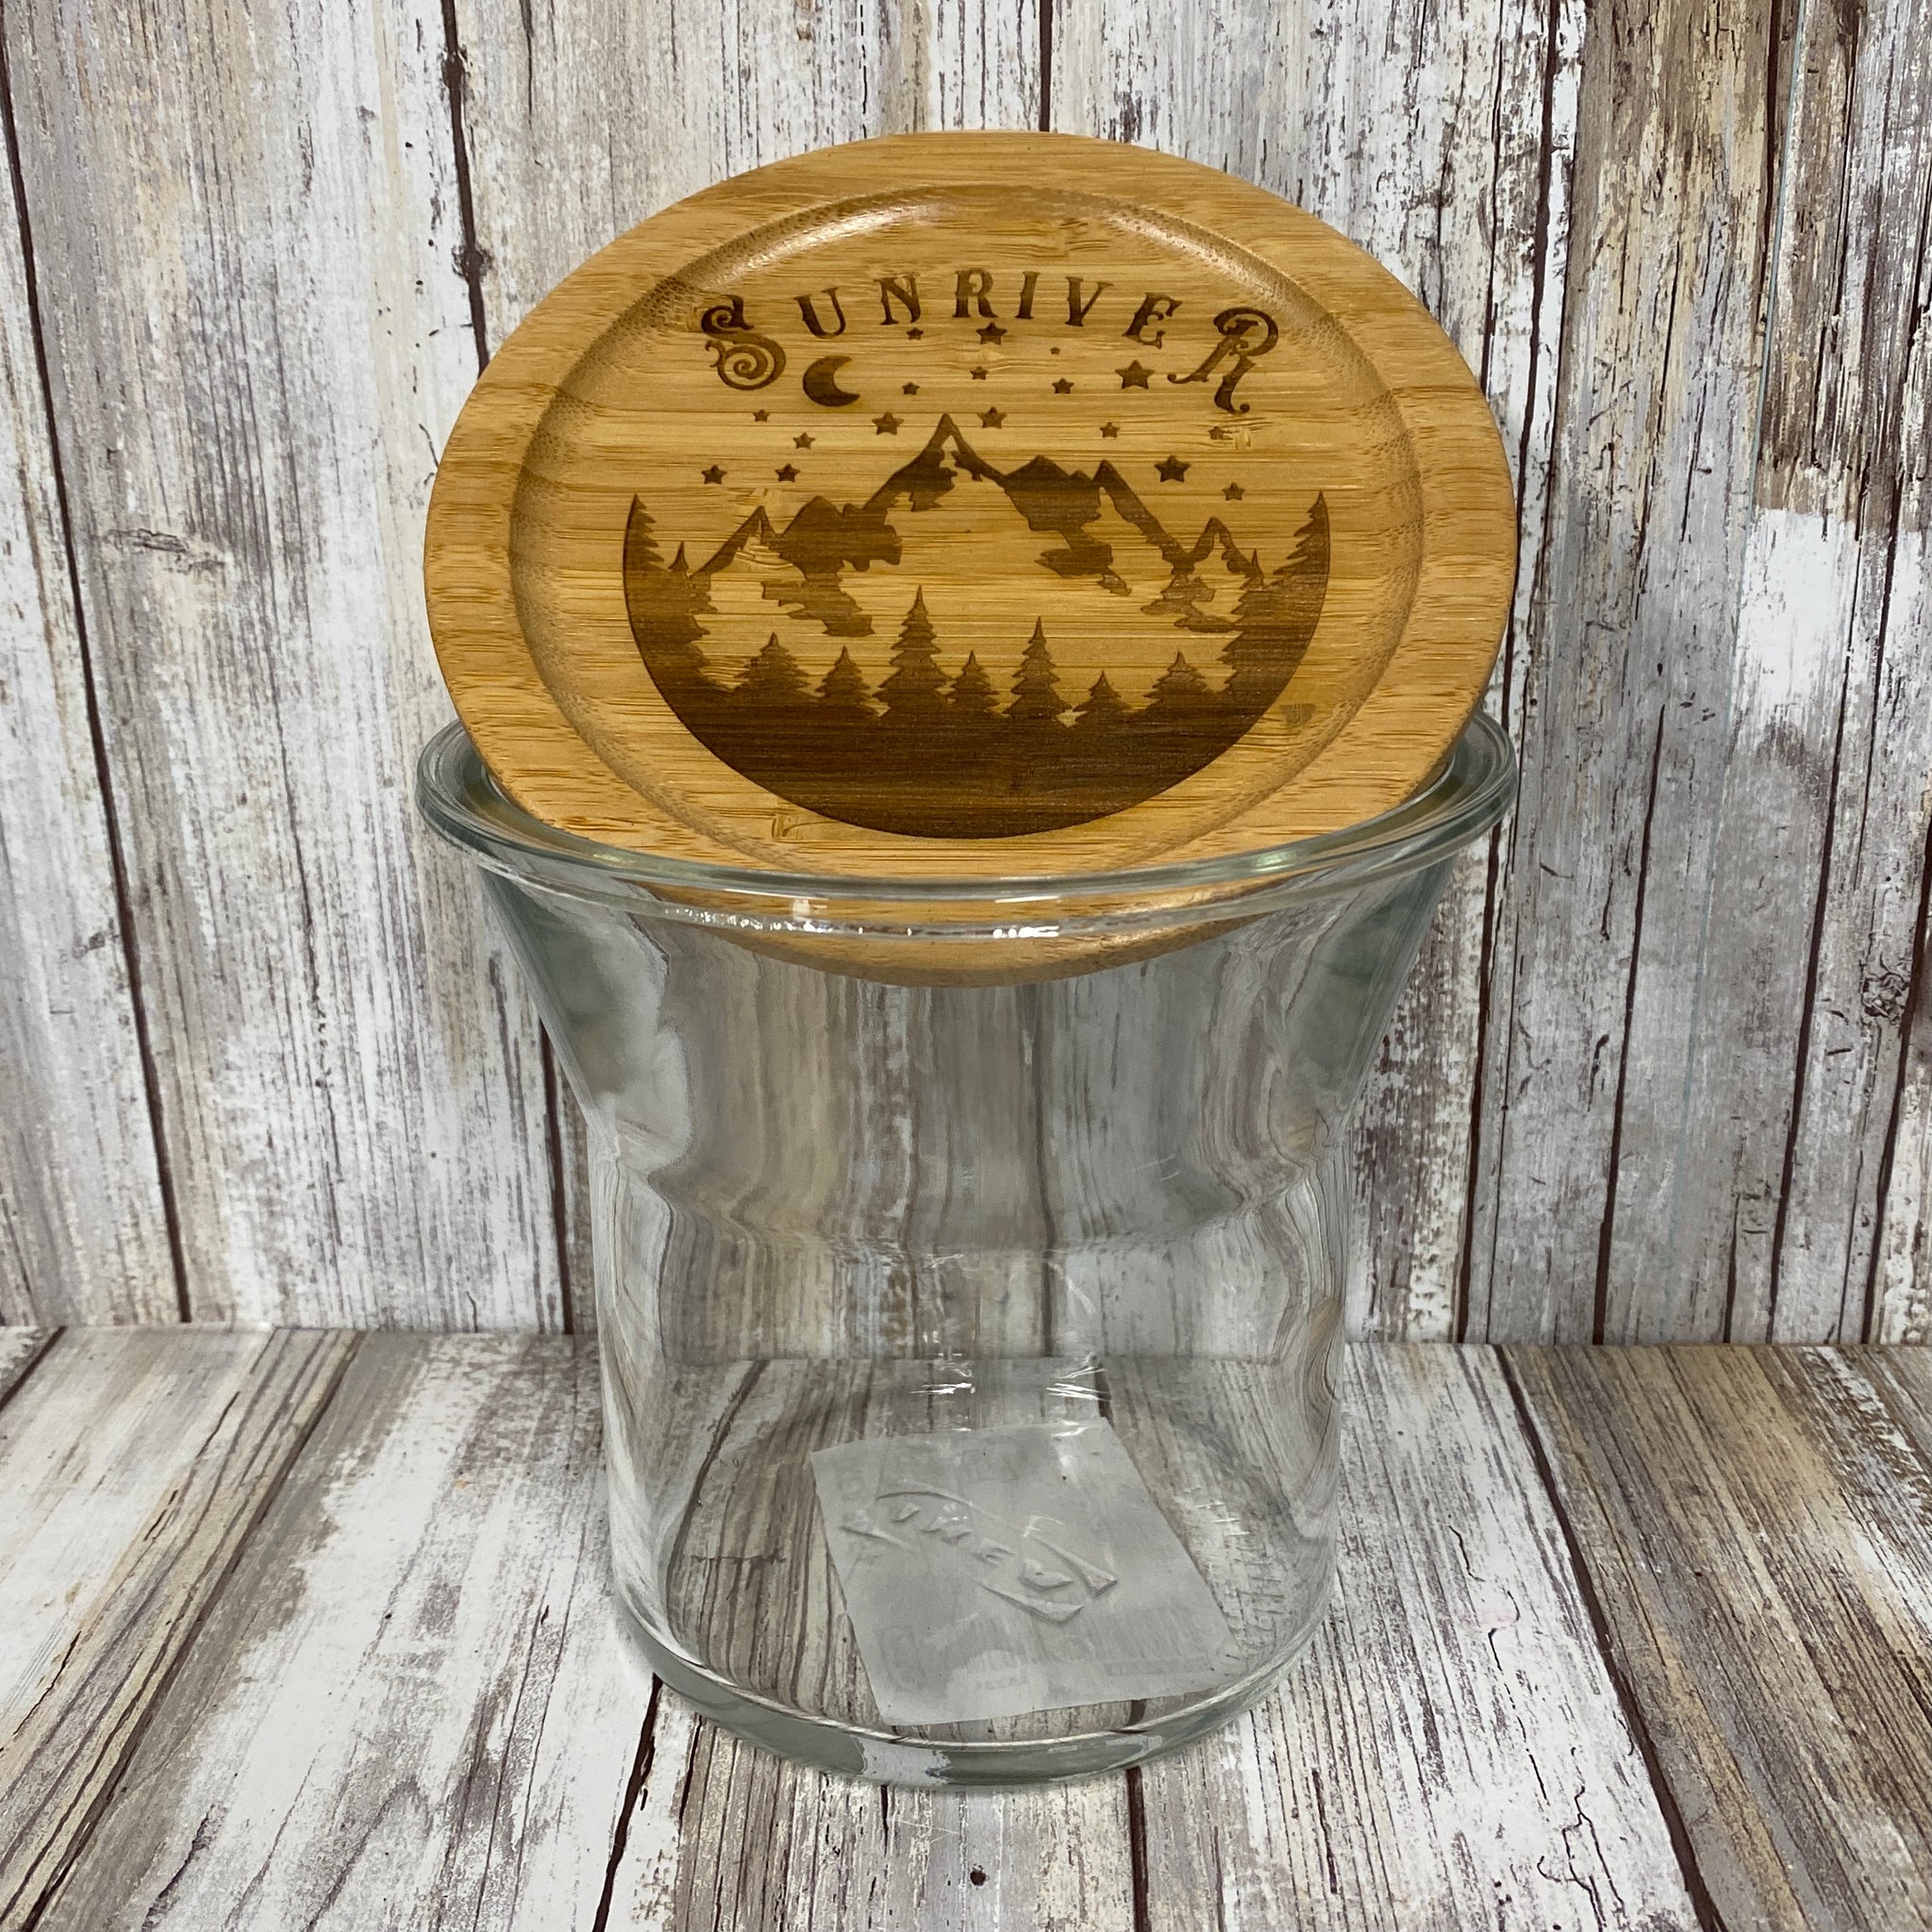 Sunriver Starry Mountain Sky Bamboo Lid Glass Food or Knick Knack Container - Laser Engraved